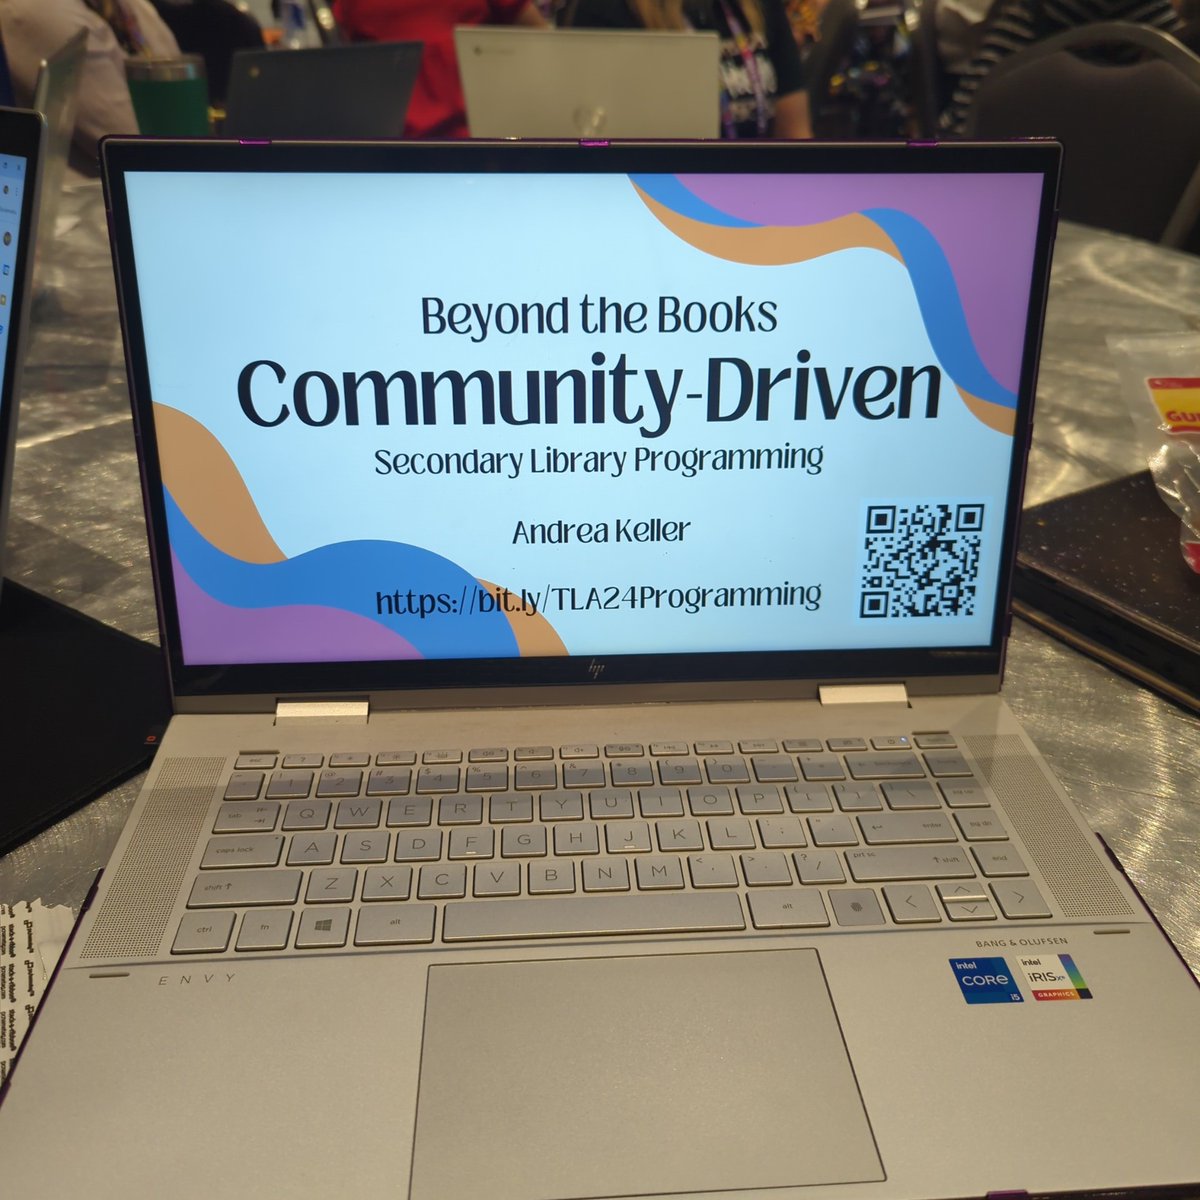 Thank you @akbusybee for a fantastic presentation! Lots of great ideas for community driven programming. #txla24